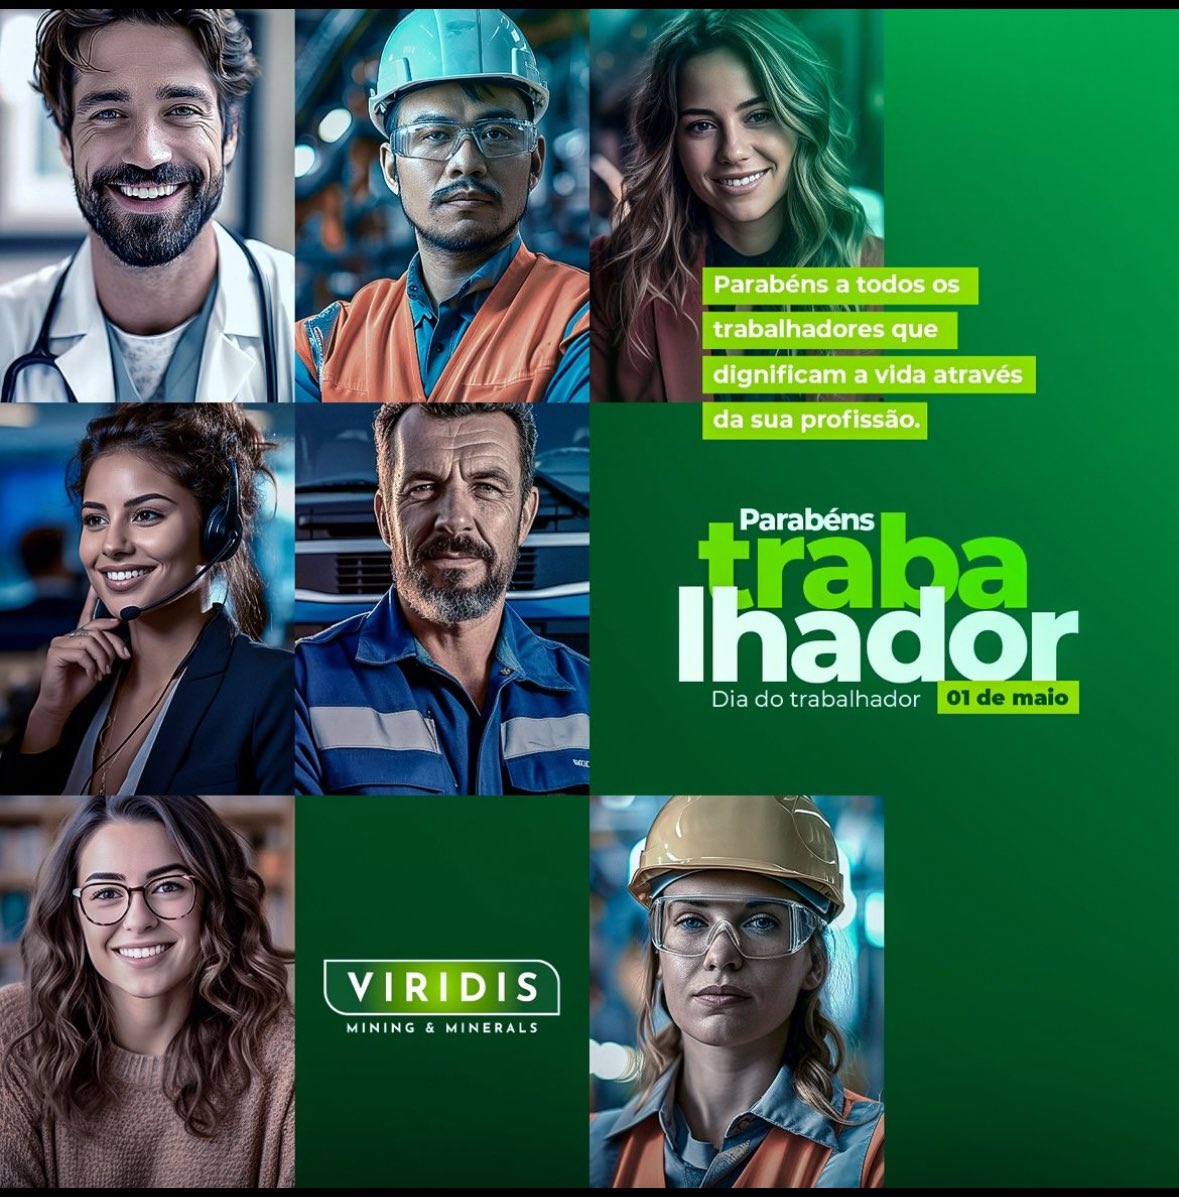 Happy Labor Day to everyone who, with dedication and effort, shapes our daily lives. To each of you, our heartfelt thanks for your tireless contributions. May this day serve as a reminder of the importance of dignified and respectful work for all

$VMM #WeareGreen #WeareViridis